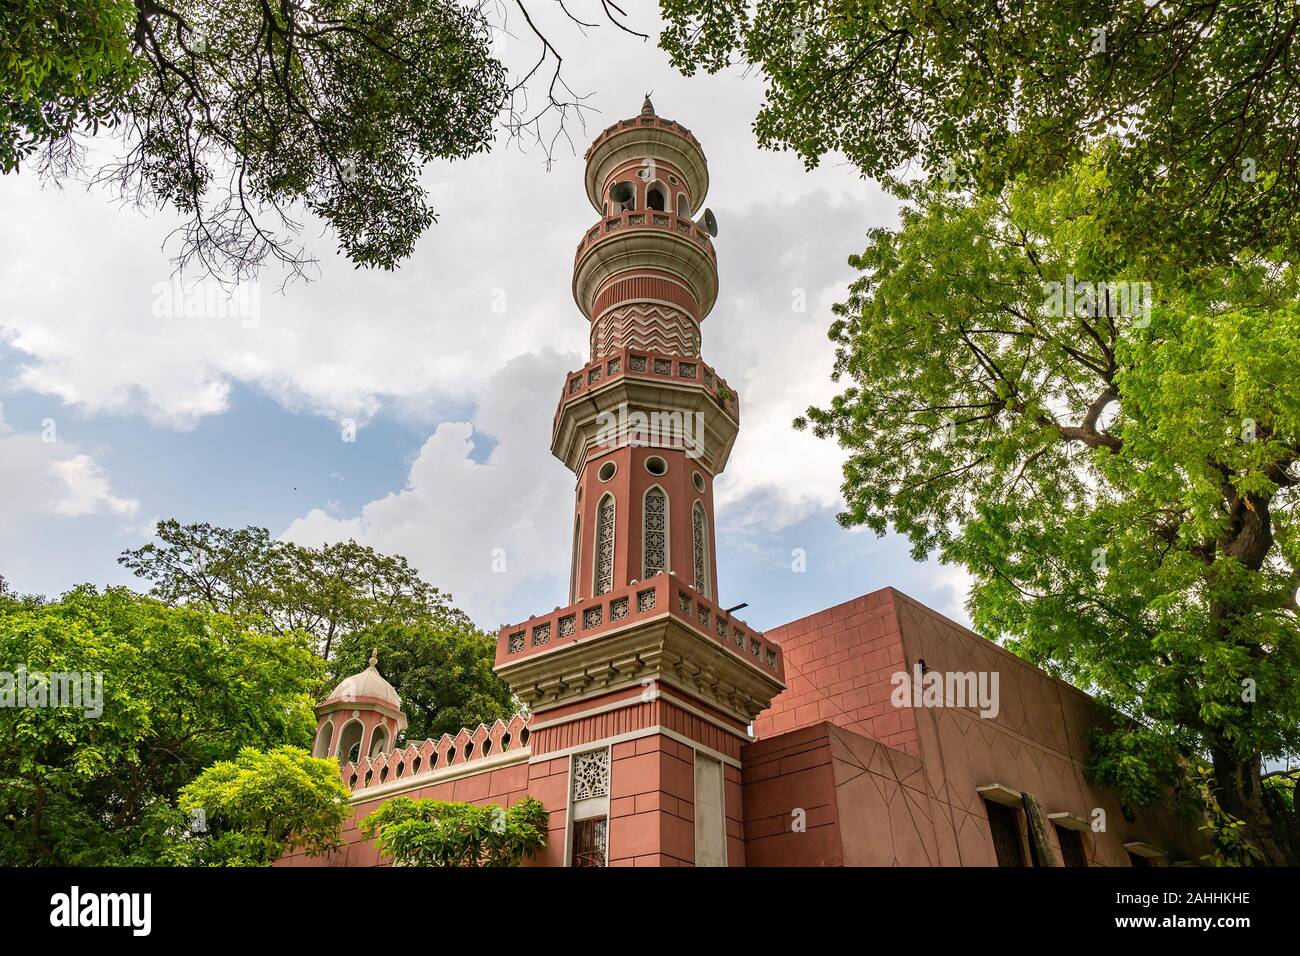 Lahore Jamia Masjid Quba Mosque Picturesque Breathtaking View of Minaret on a Cloudy Day Stock Photo